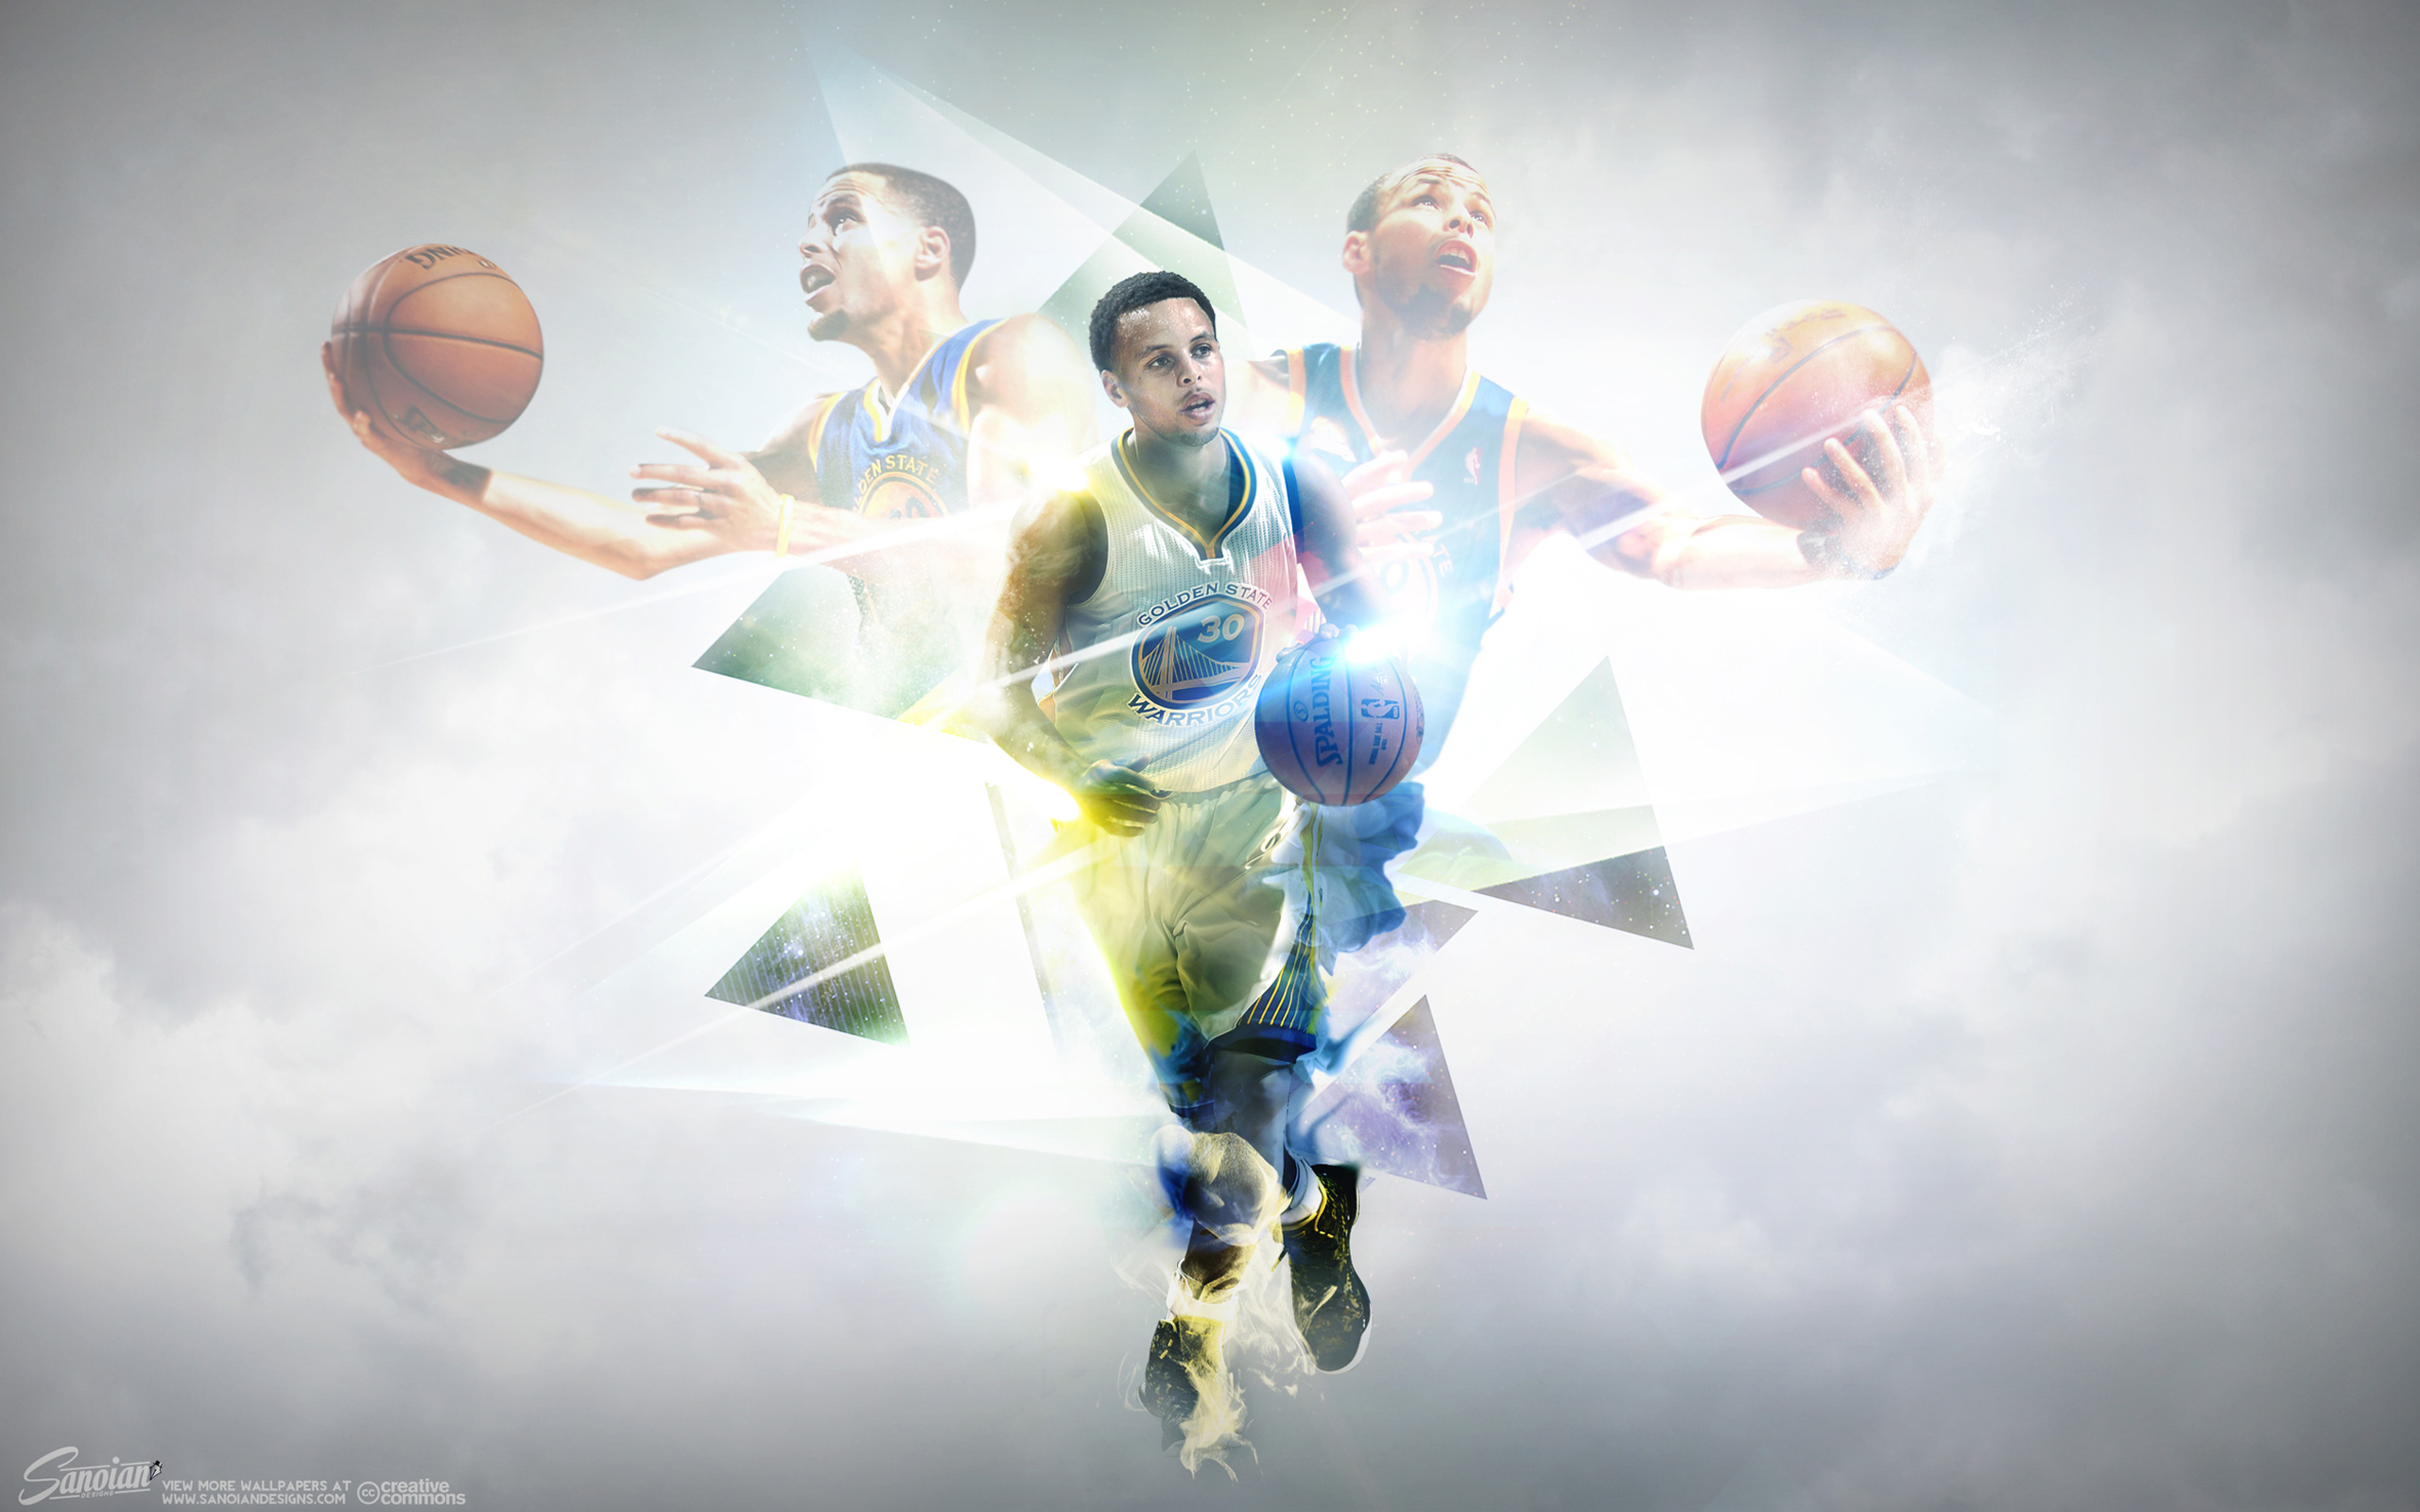 Stephen Curry Wallpaper Background